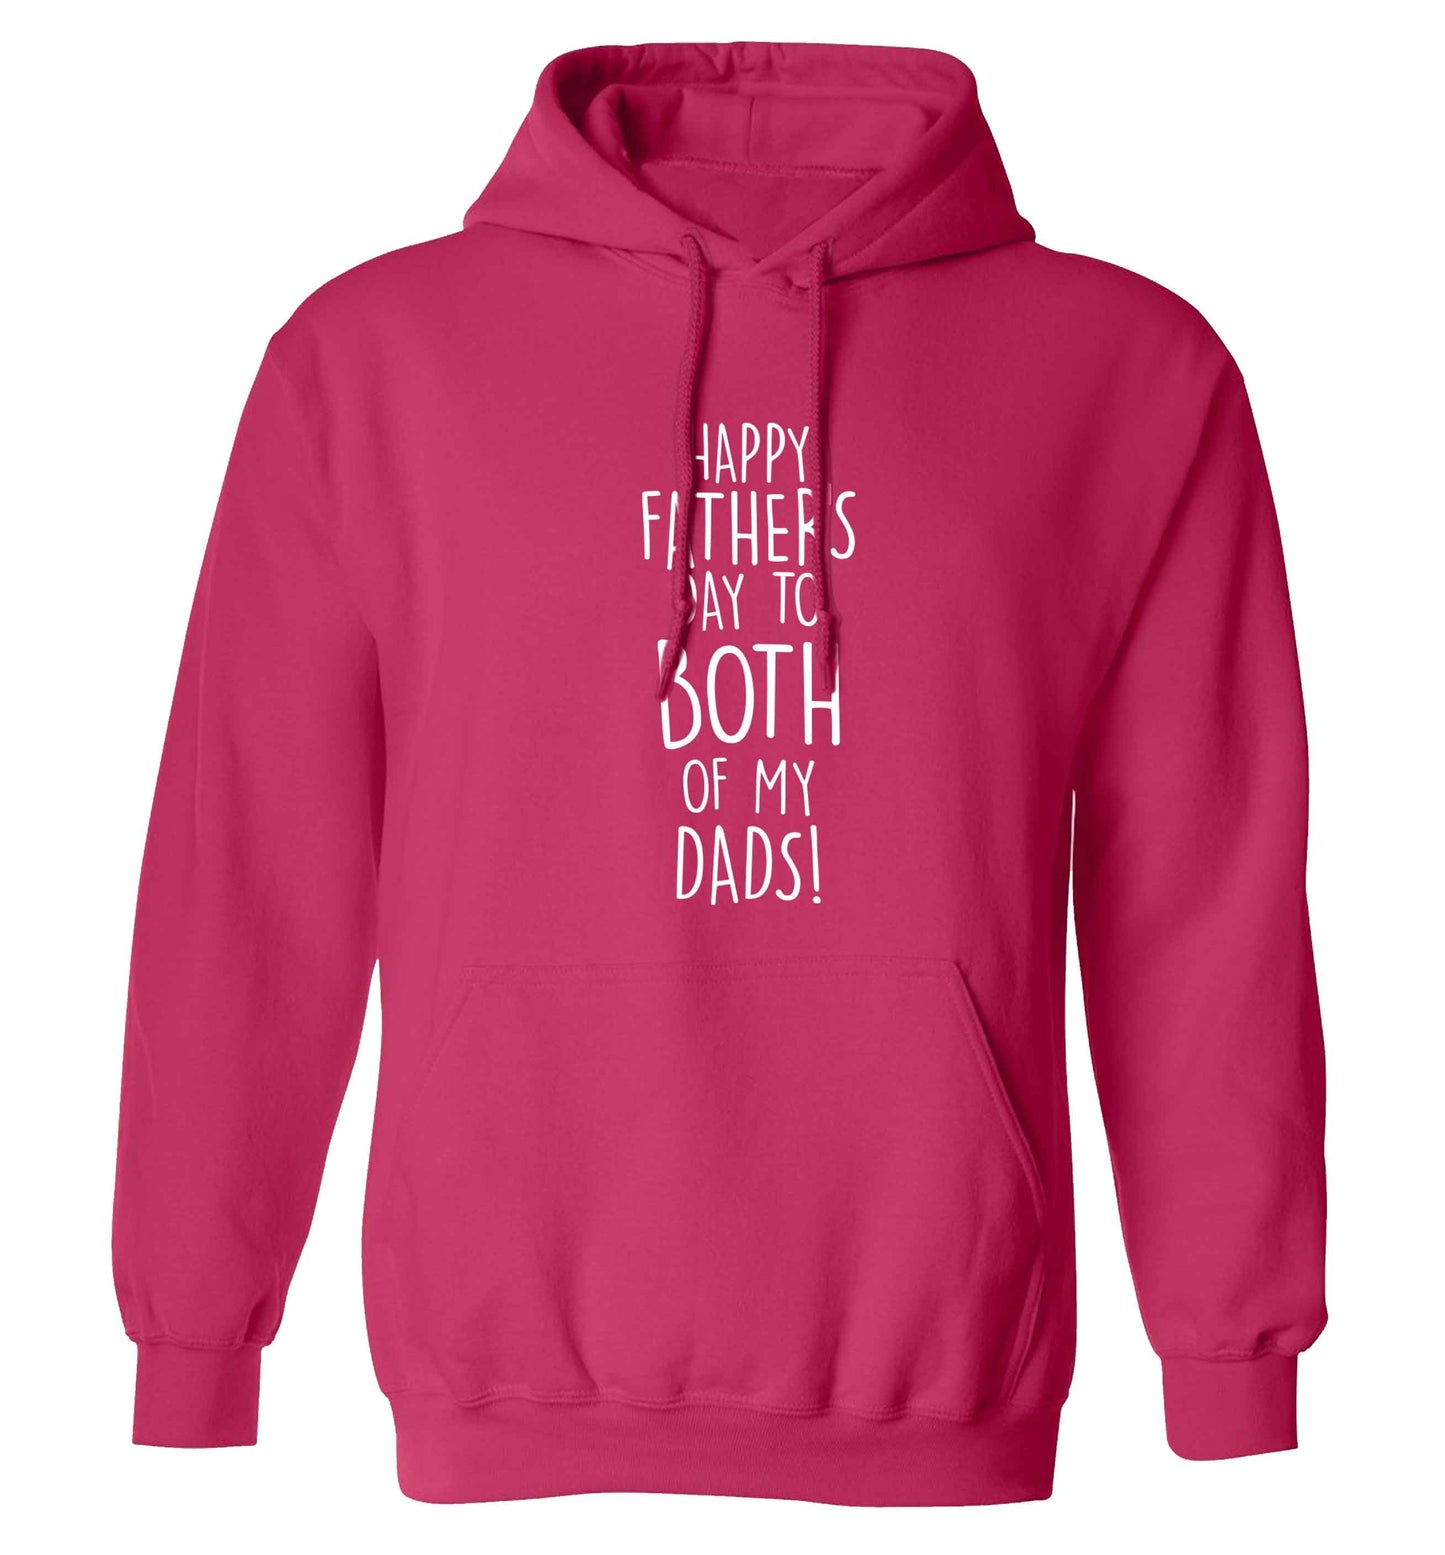 Happy Father's day to both of my dads adults unisex pink hoodie 2XL